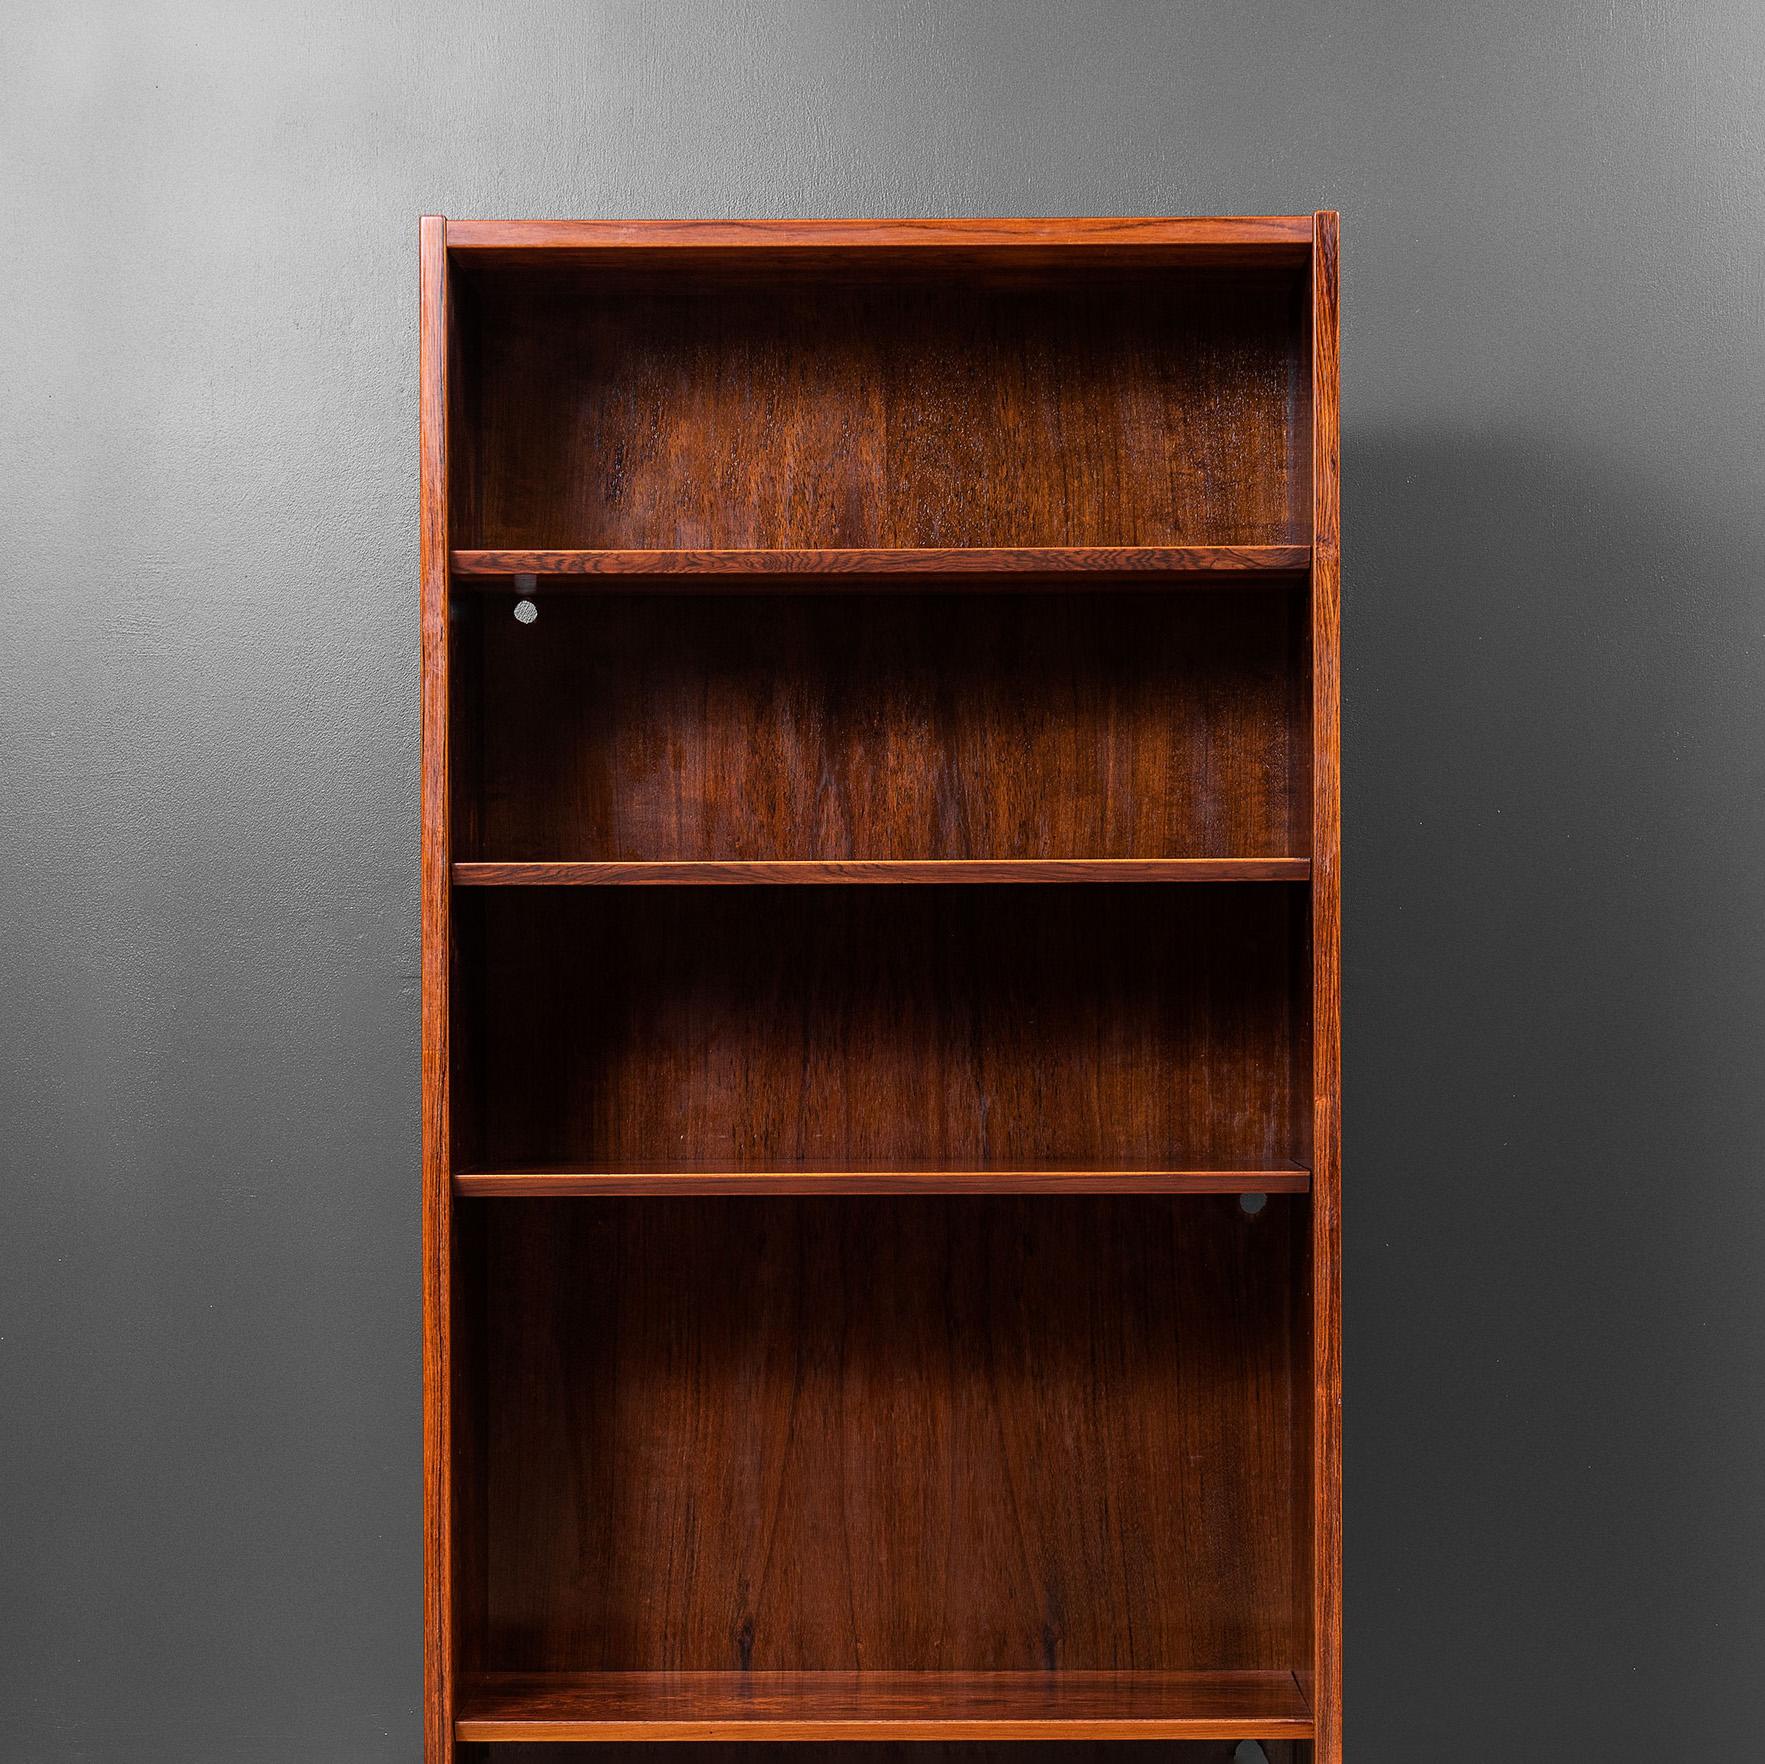 A Danish midcentury bookcase with height adjustable shelves.